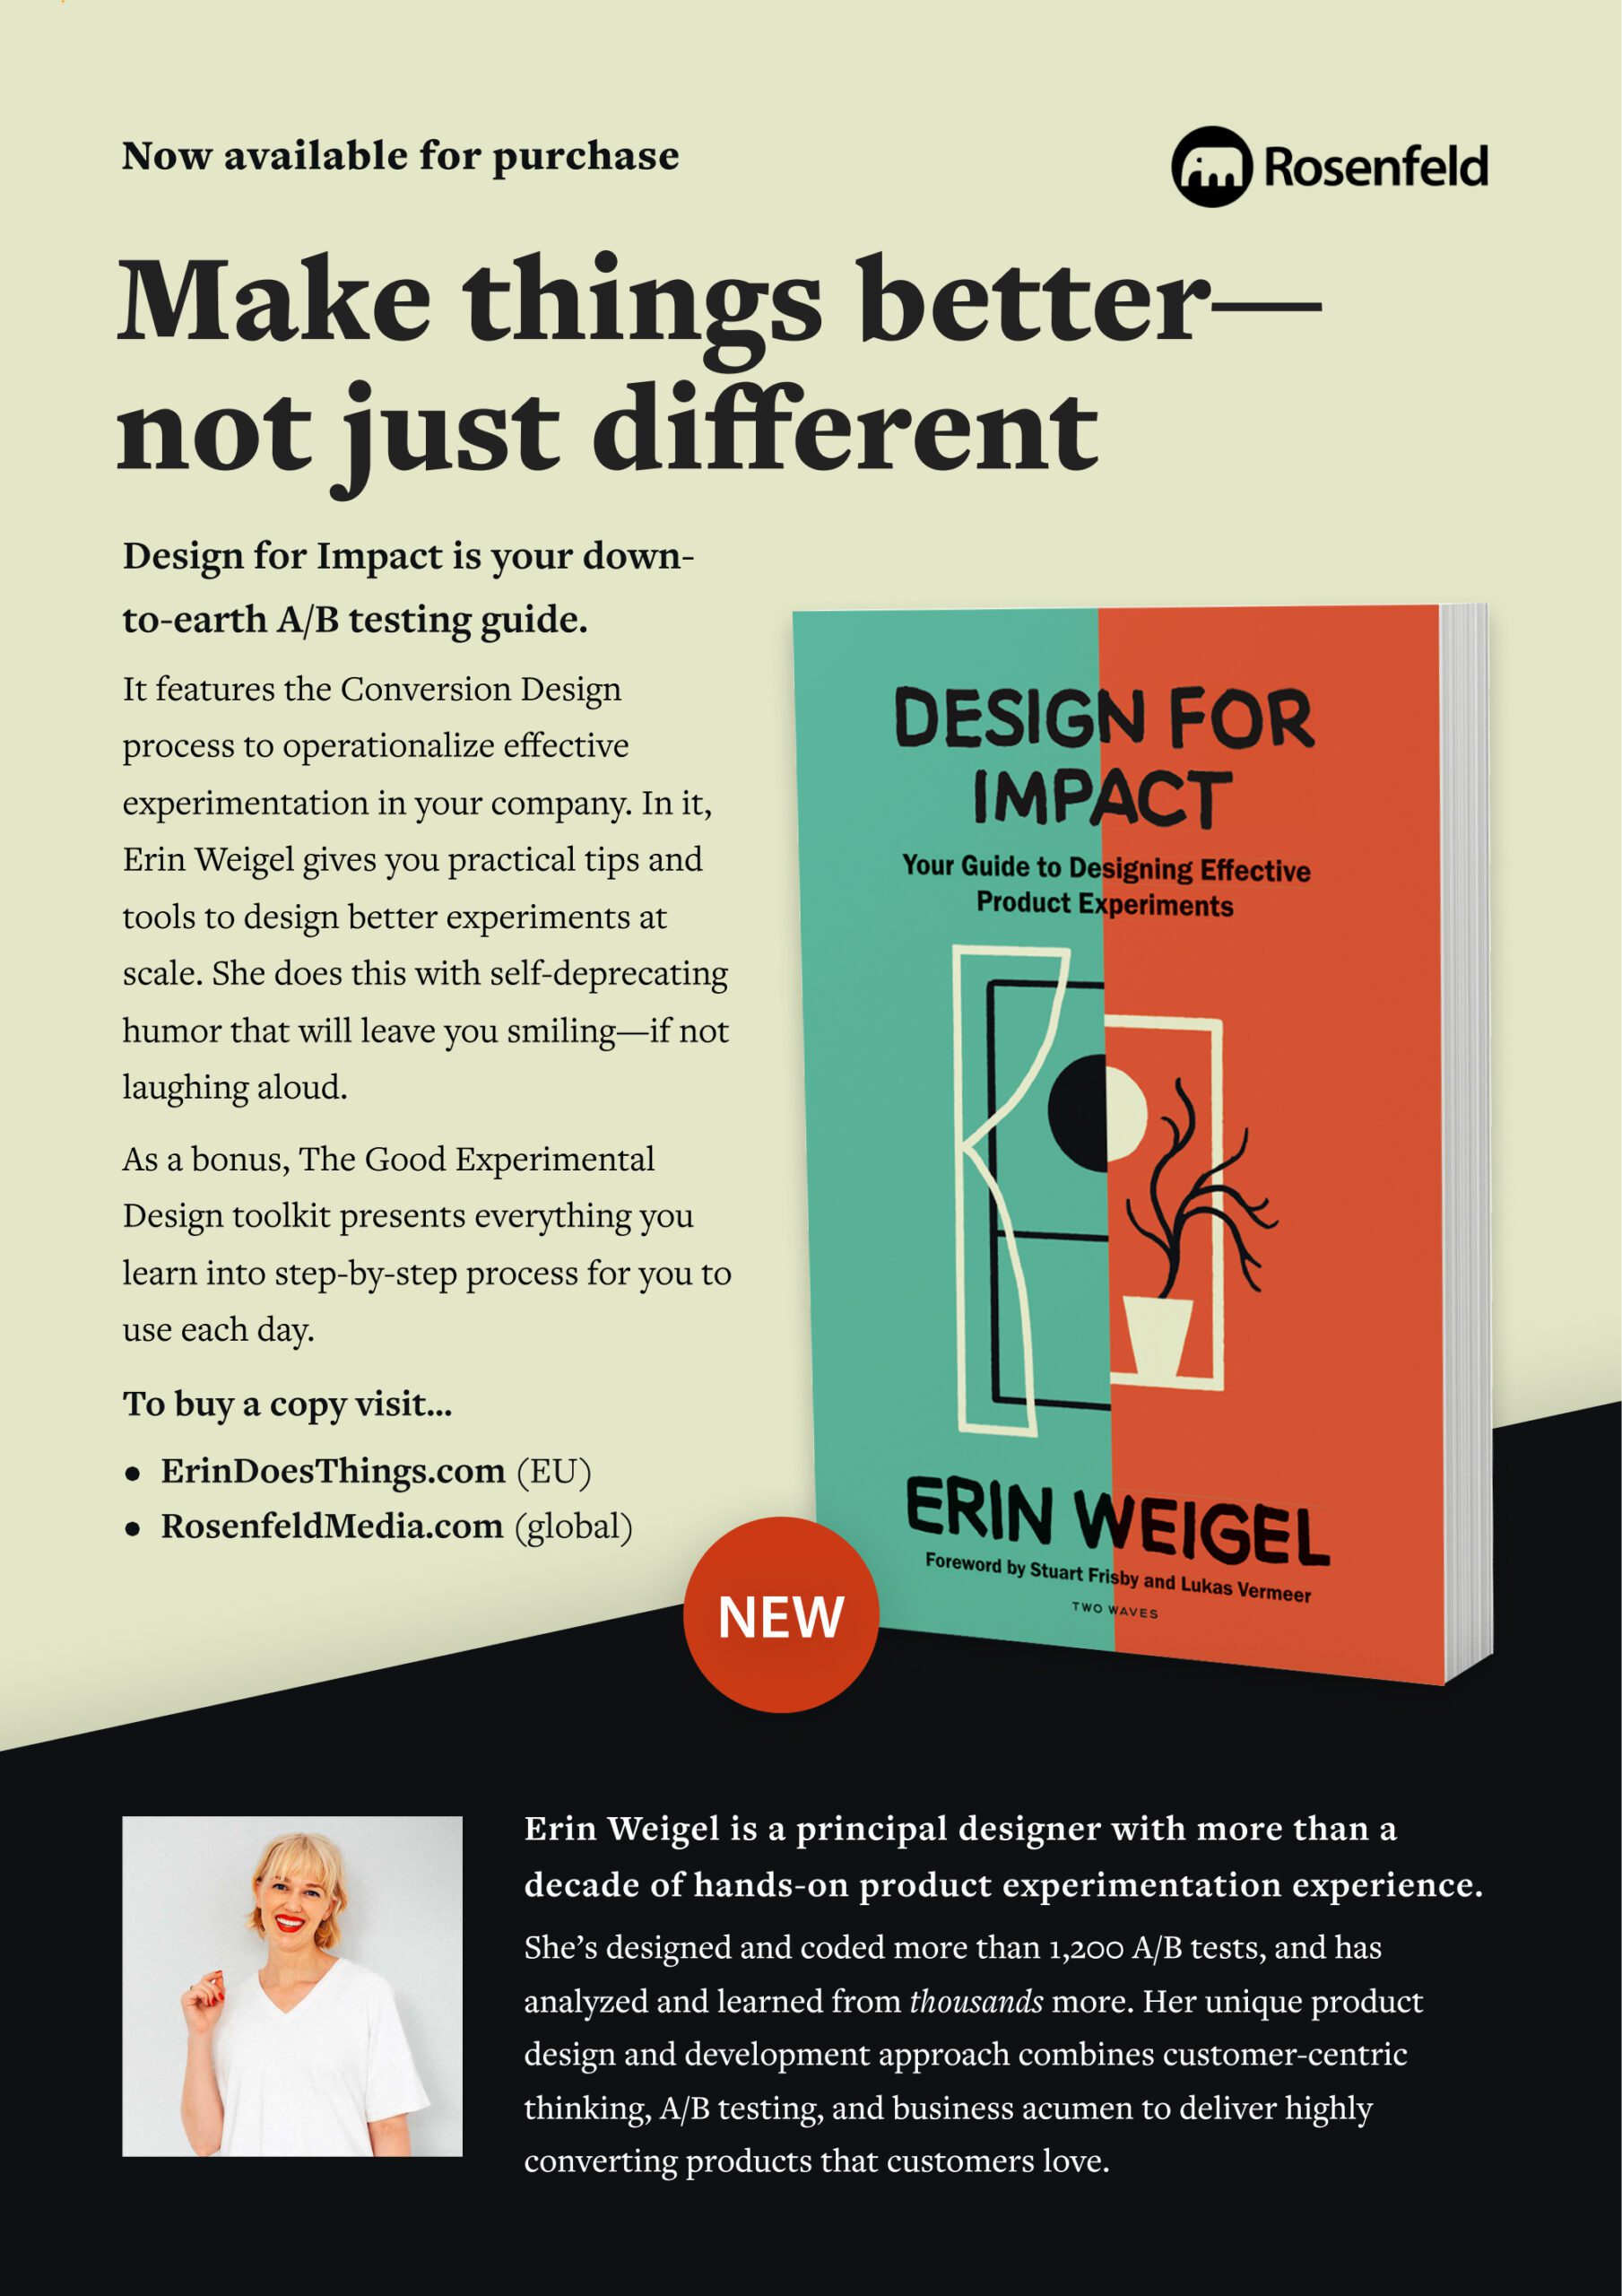 Make things better—not just different Design for Impact is your down-to-earth A/B testing guide.  It features the Conversion Design process to operationalize effective experimentation in your company. In it, Erin Weigel gives you practical tips and tools to design better experiments at scale. She does this with self-deprecating humor that will leave you smiling—if not laughing aloud. As a bonus, The Good Experimental Design toolkit presents everything you learn into step-by-step process for you to use each day. To buy a copy visit... ErinDoesThings.com (EU) RosenfeldMedia.com (global)